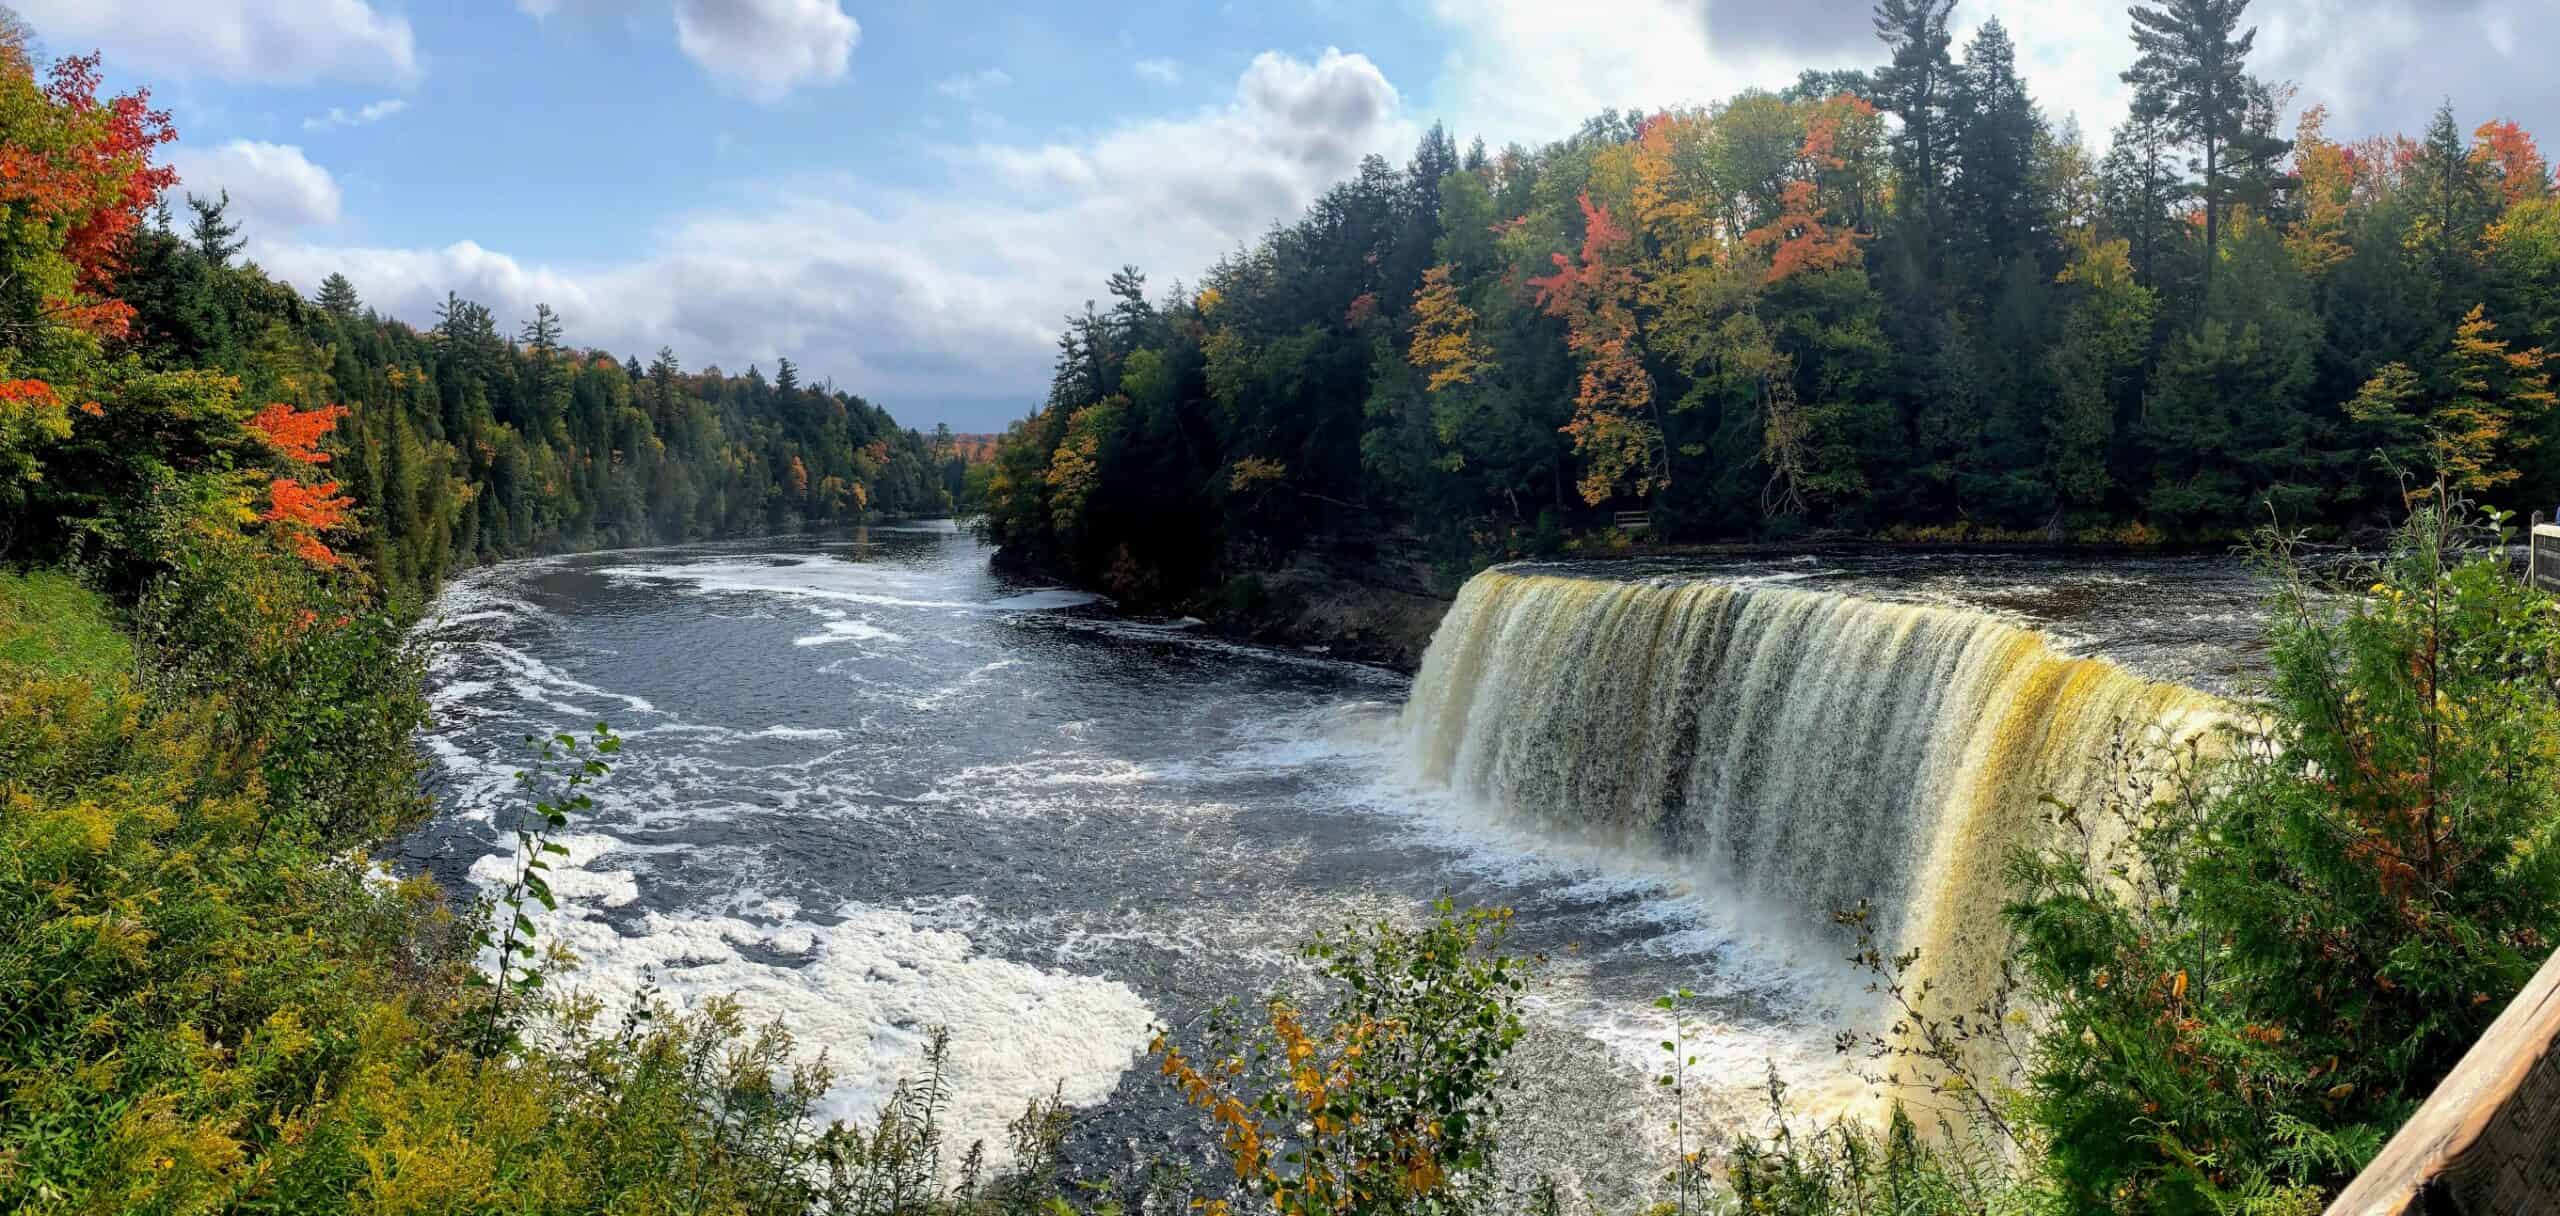 Before traveling from Tahquamenon Falls to Pictured Rocks, make sure you see the Upper Falls, this 50-foot tall waterfall.